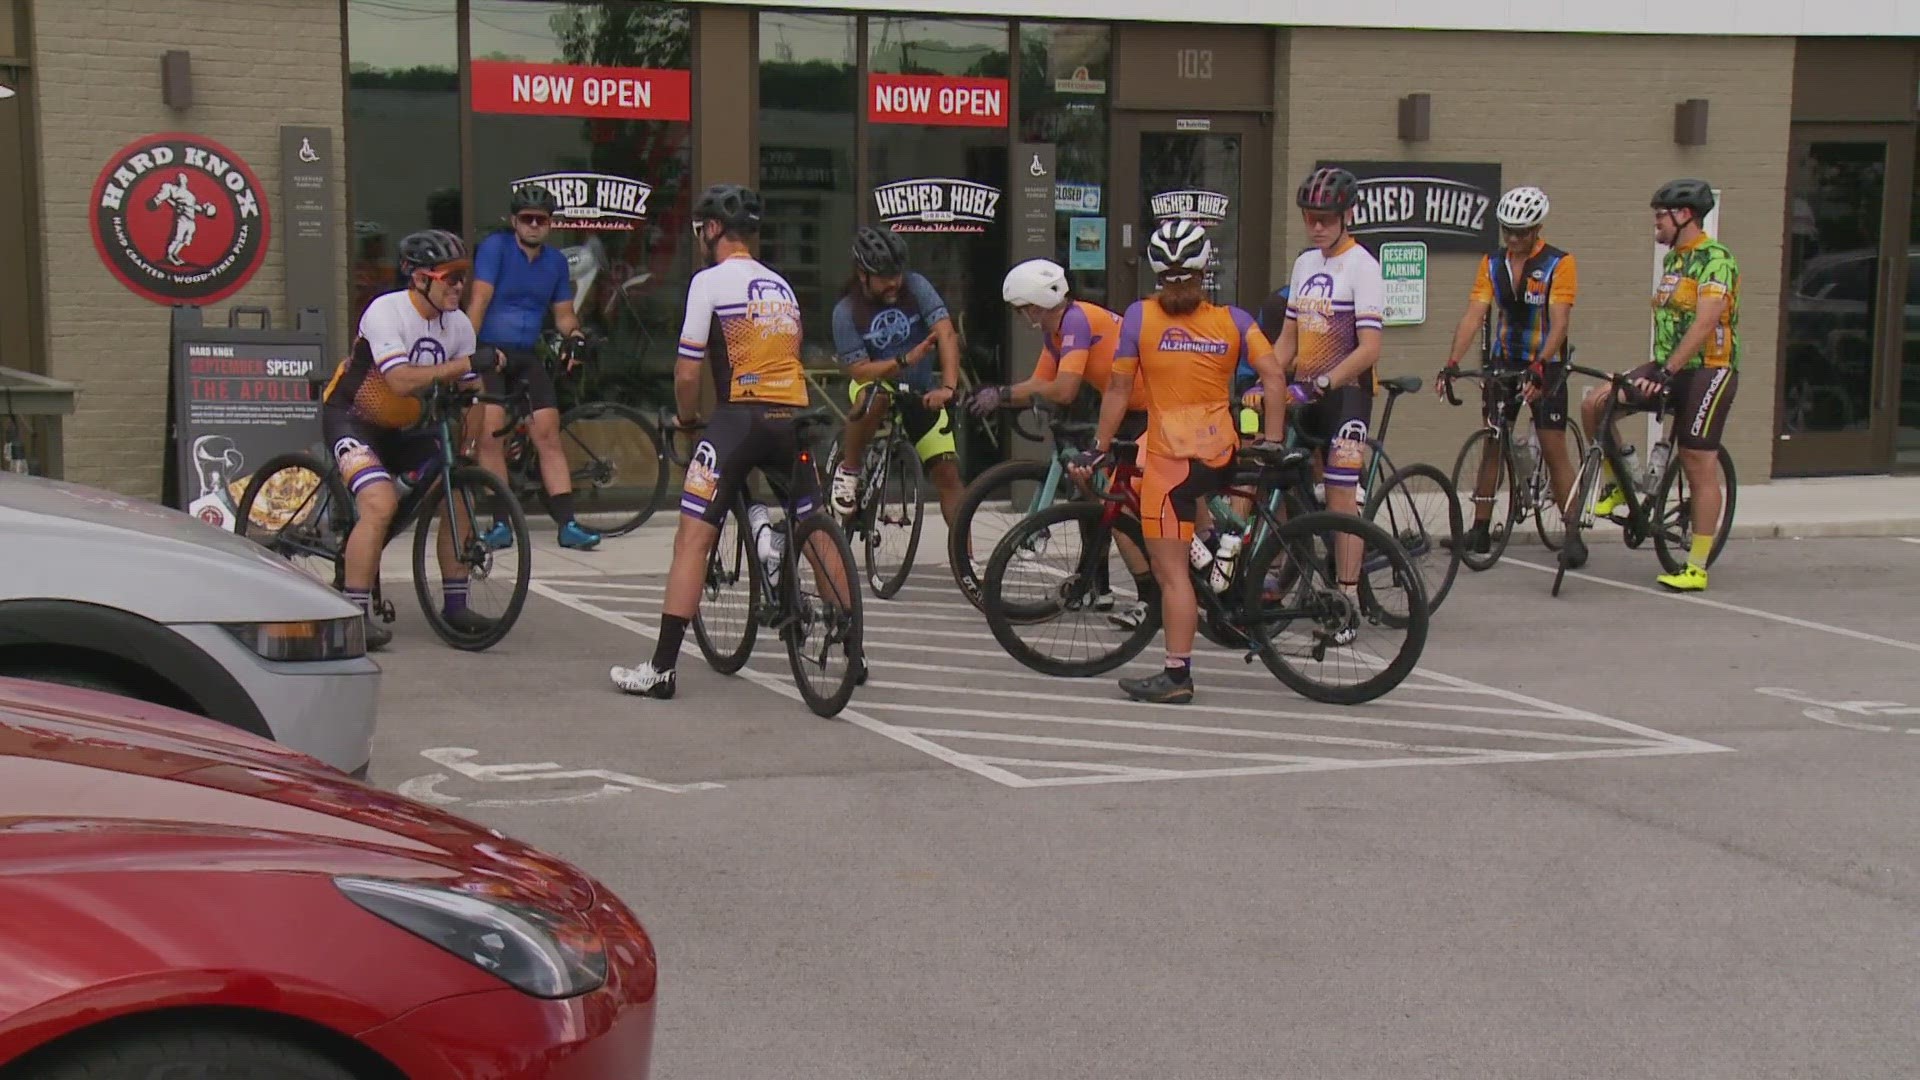 In the event, bikers will be traveling over 1,000 miles: 1 mile per win for Summitt.